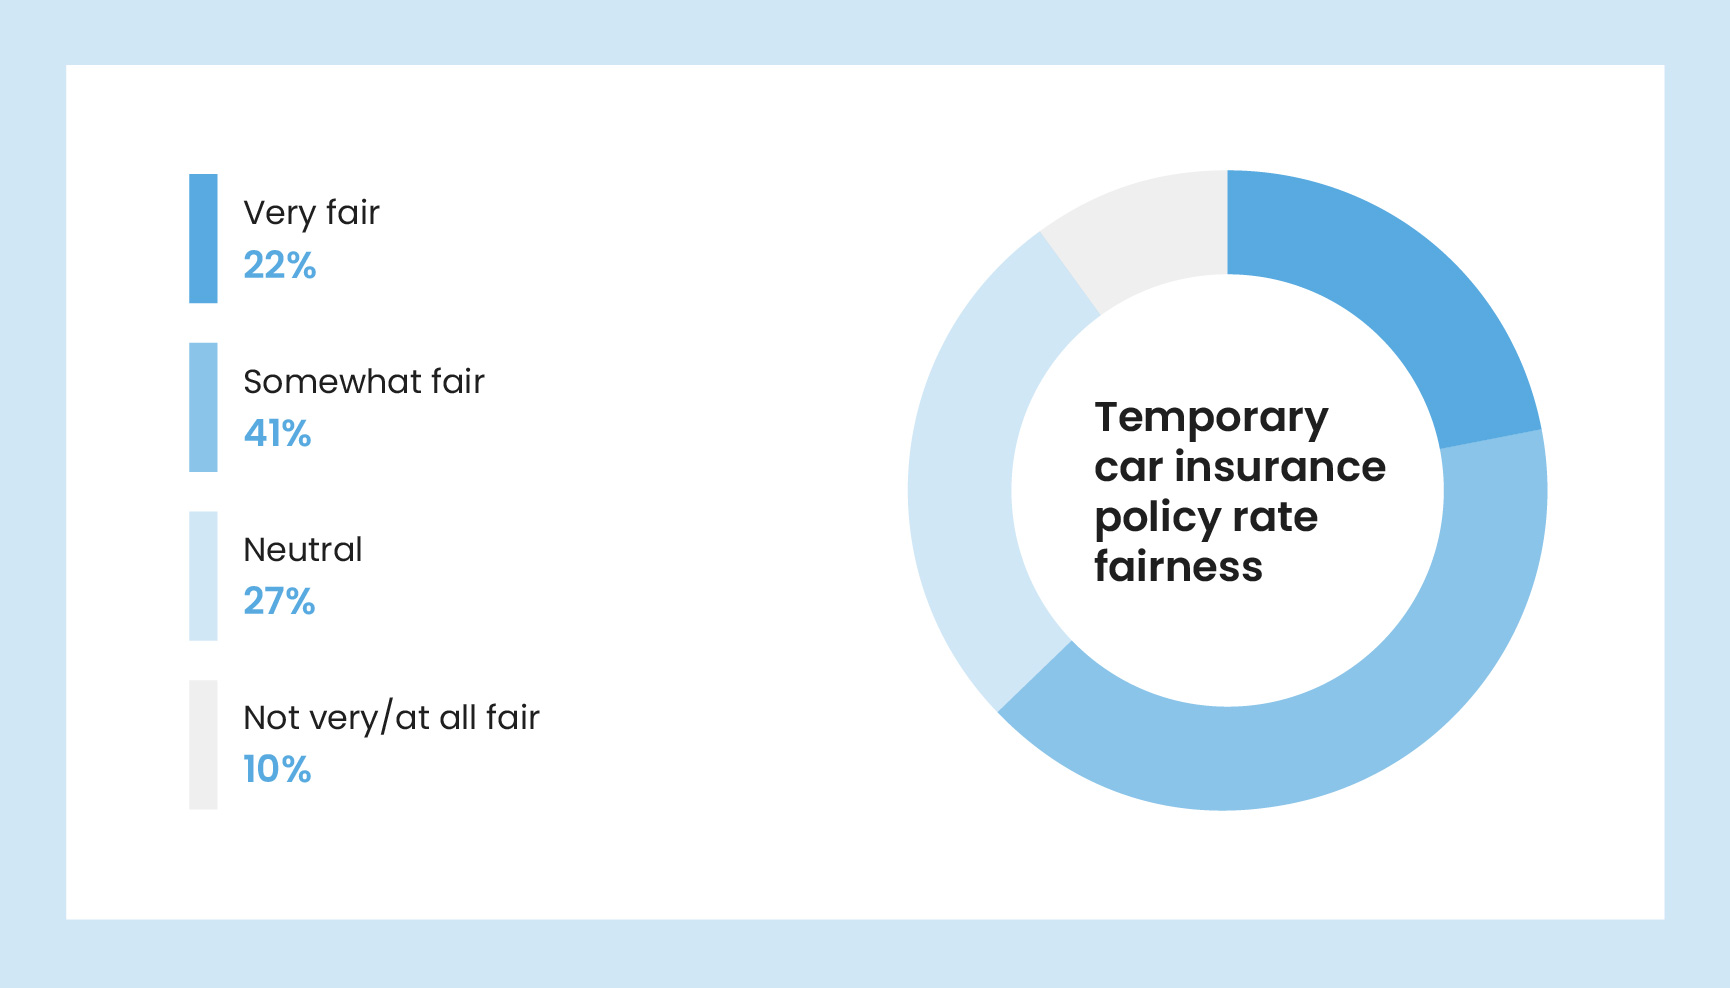 A light blue and grey pie chart showing how fair people think temporary car insurance policy rates are